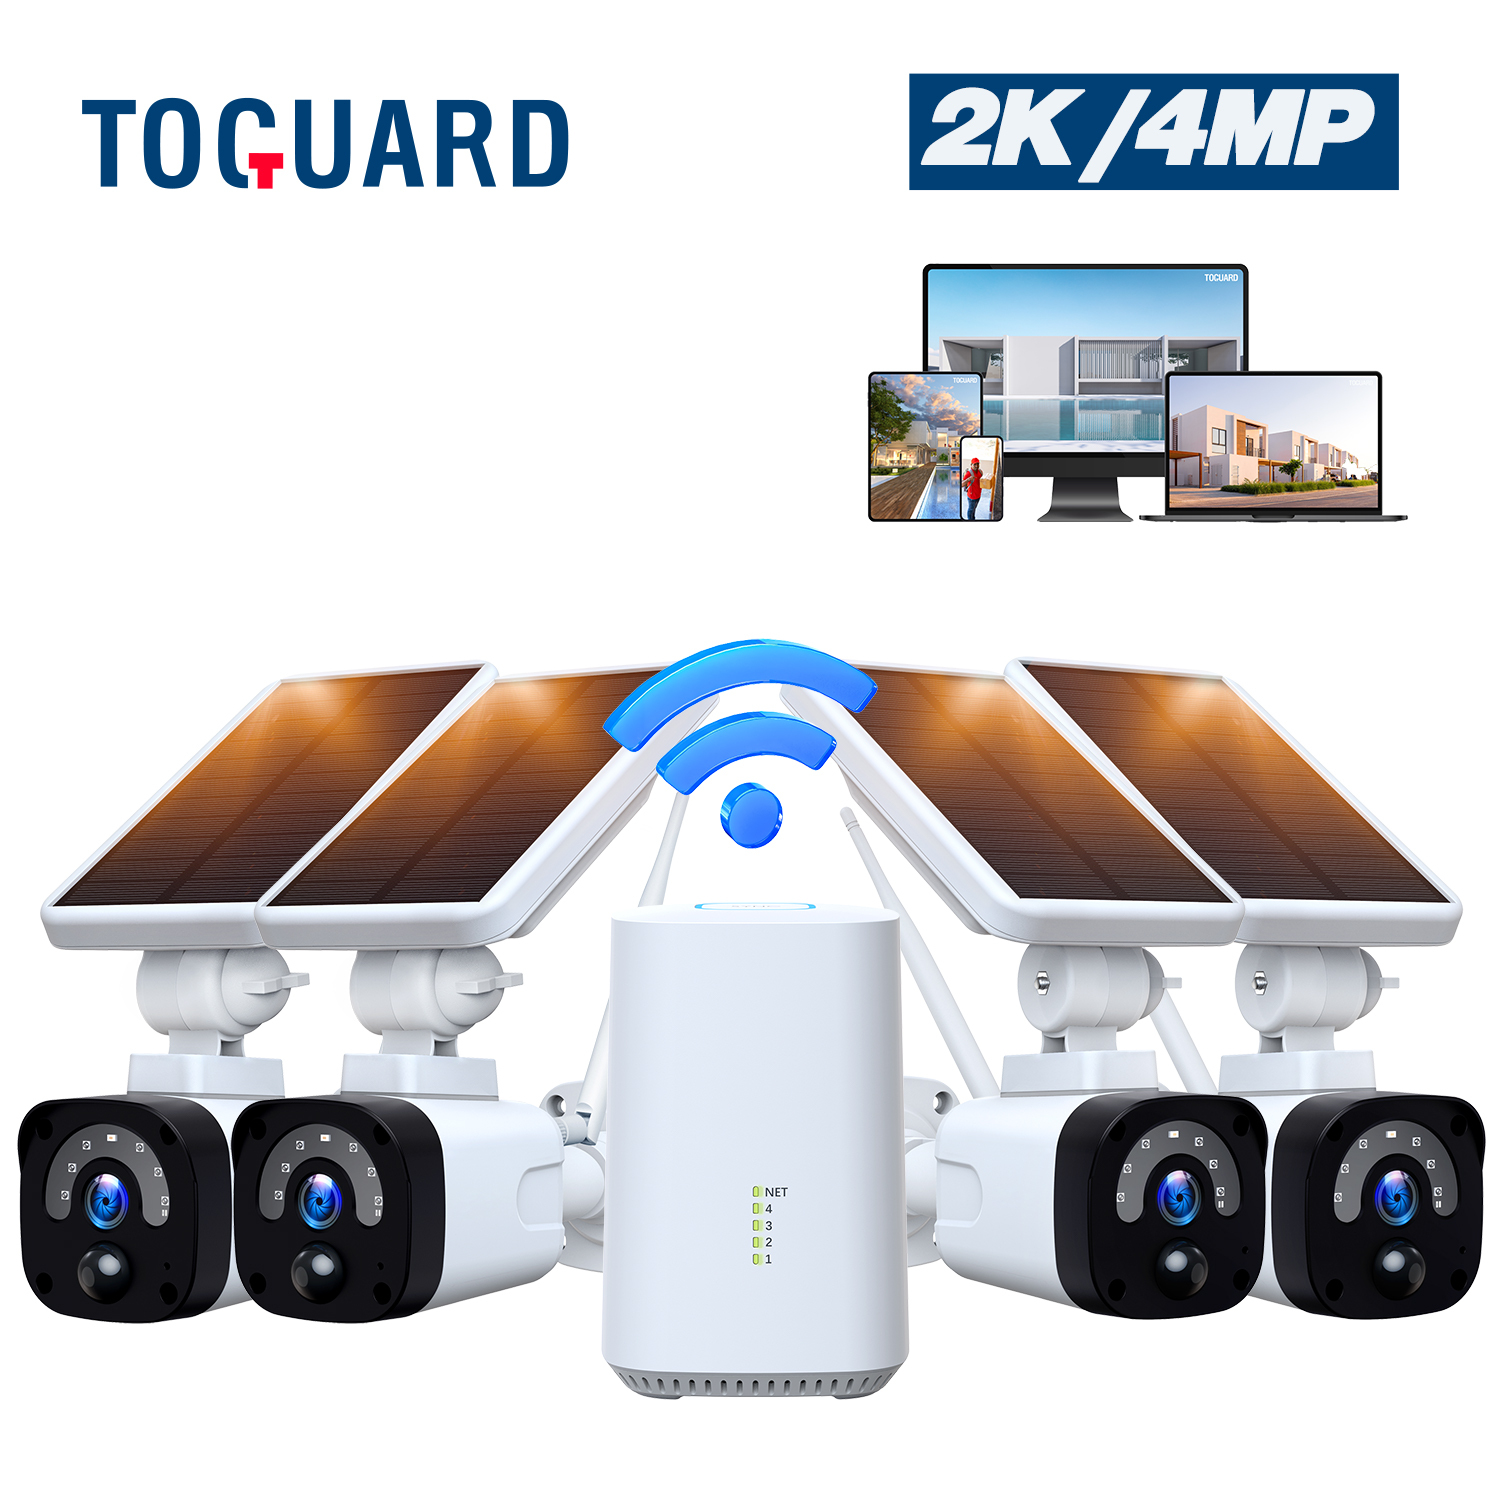 TOGUARD 3MP Solar Wireless Security Camera System Outdoor with Base Station, CCTV Camera Security System 2-Way Audio PIR Motion Detection Night Vision Support TF/Cloud Storage HDMI Output - image 1 of 9